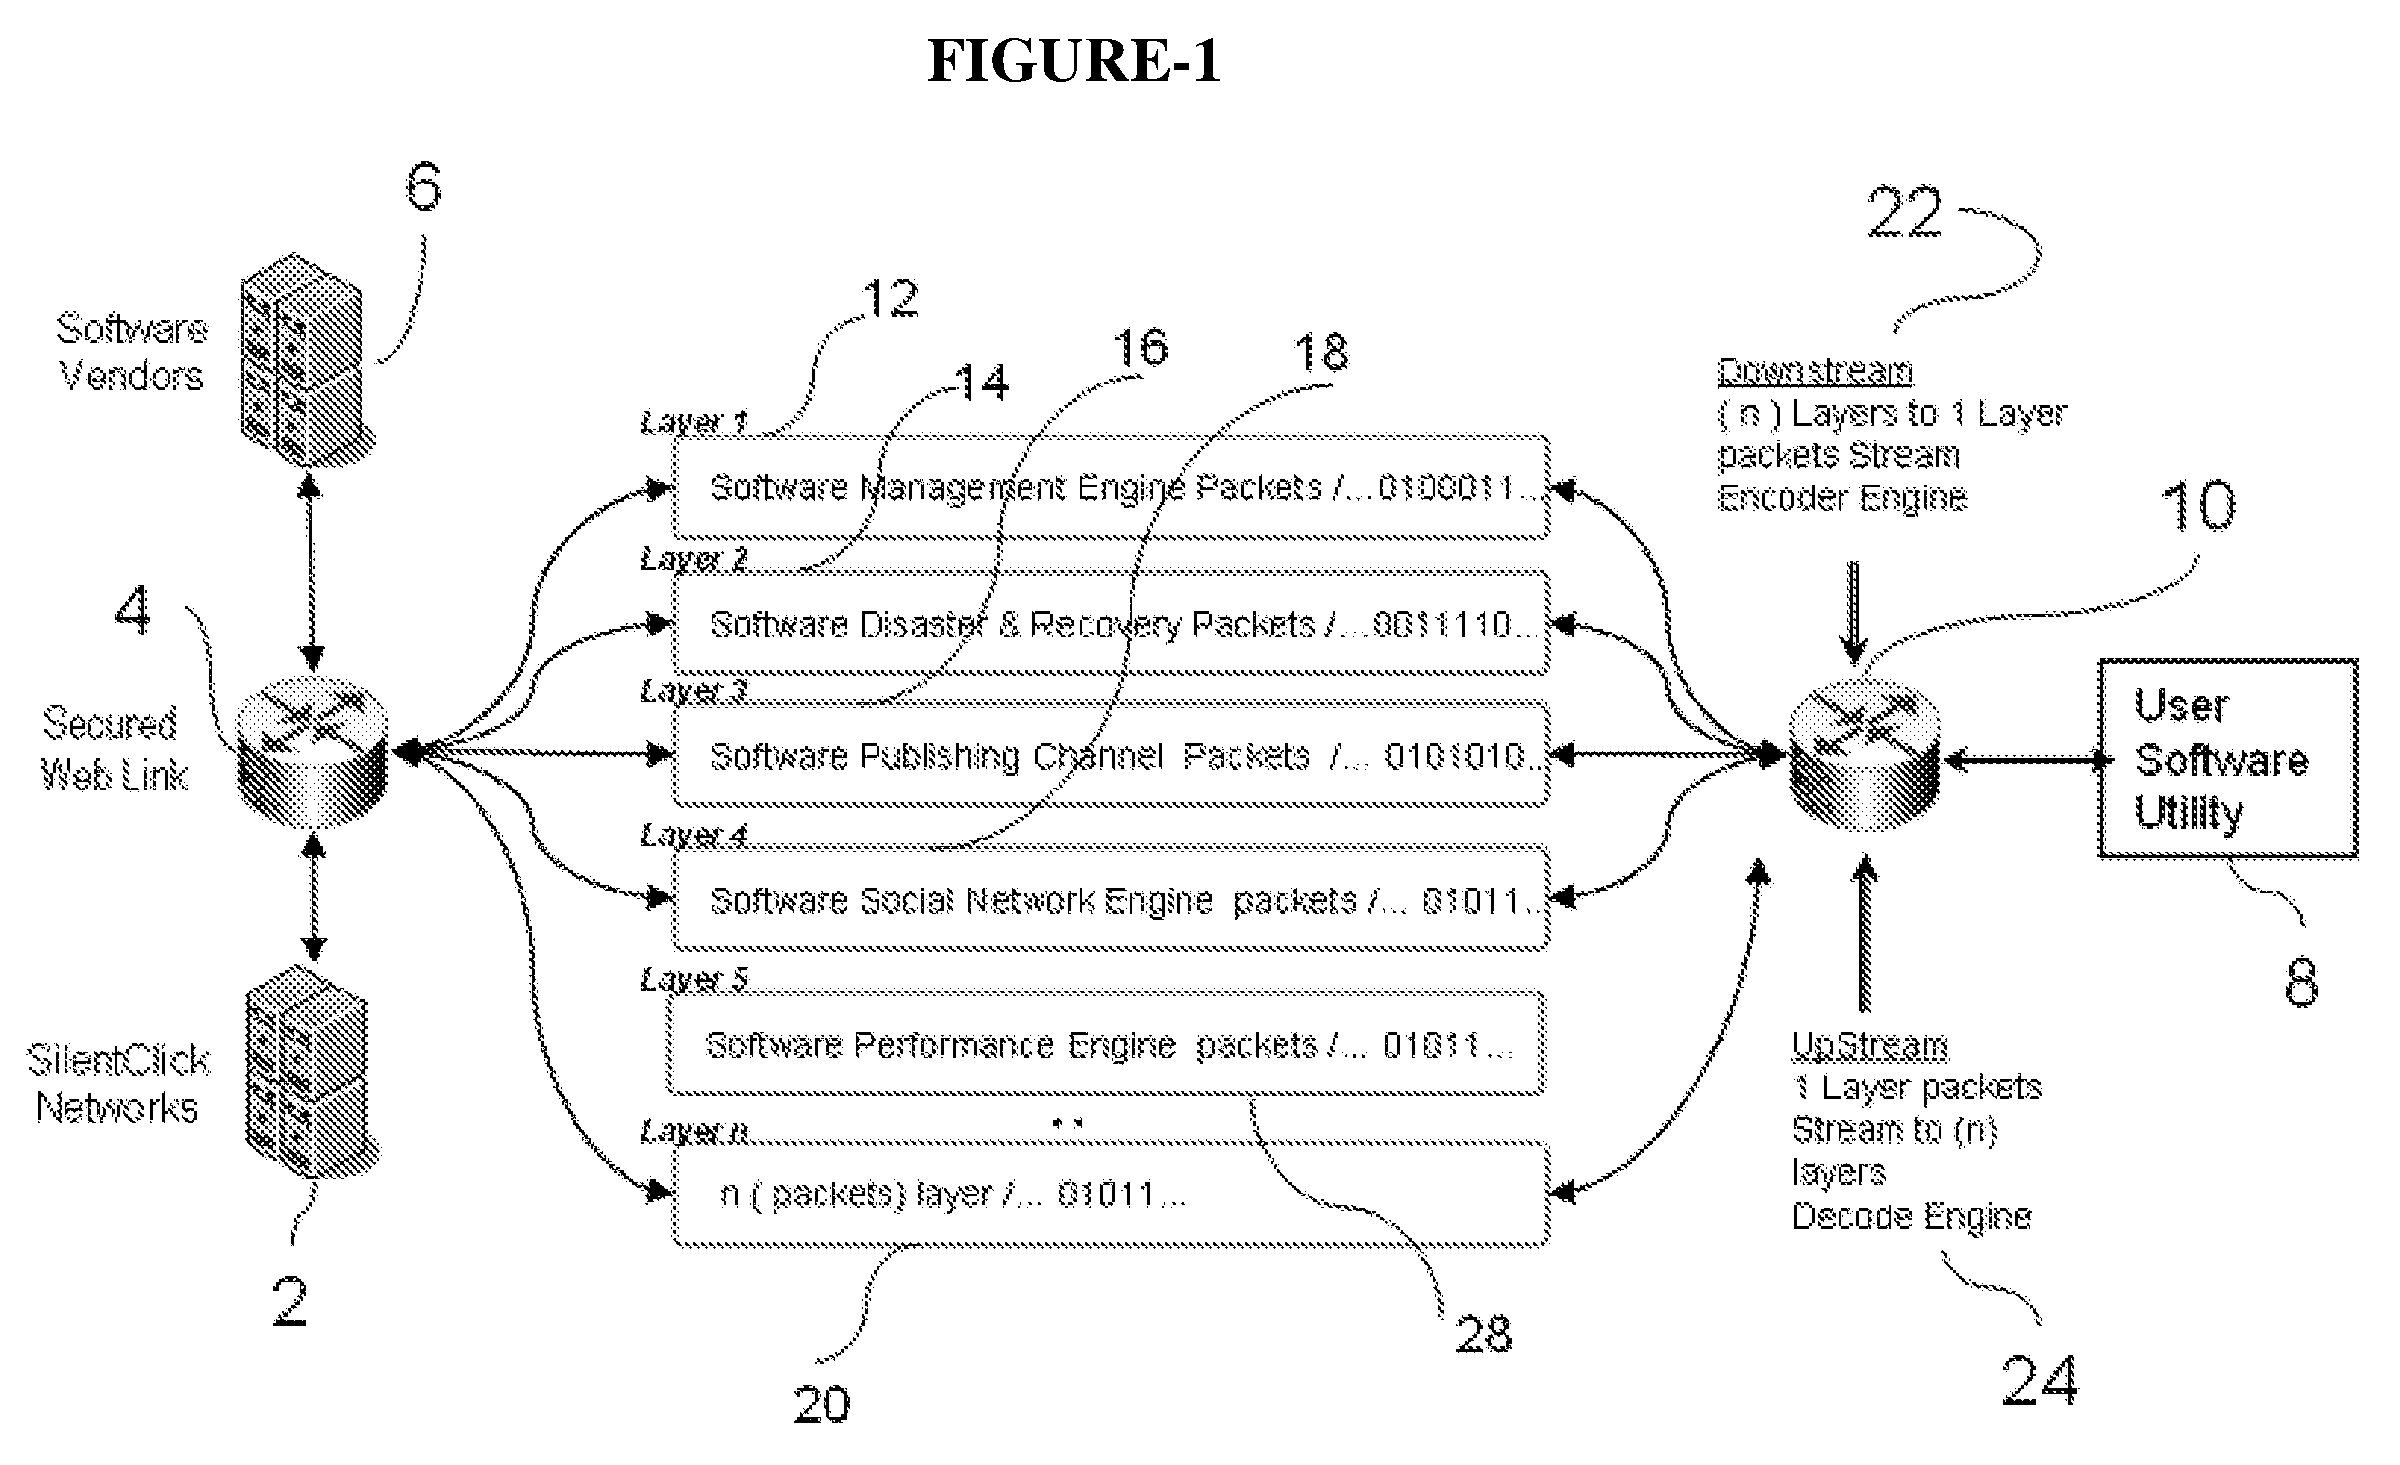 Method & system for acquiring, storing, & managing software applications via a communications network